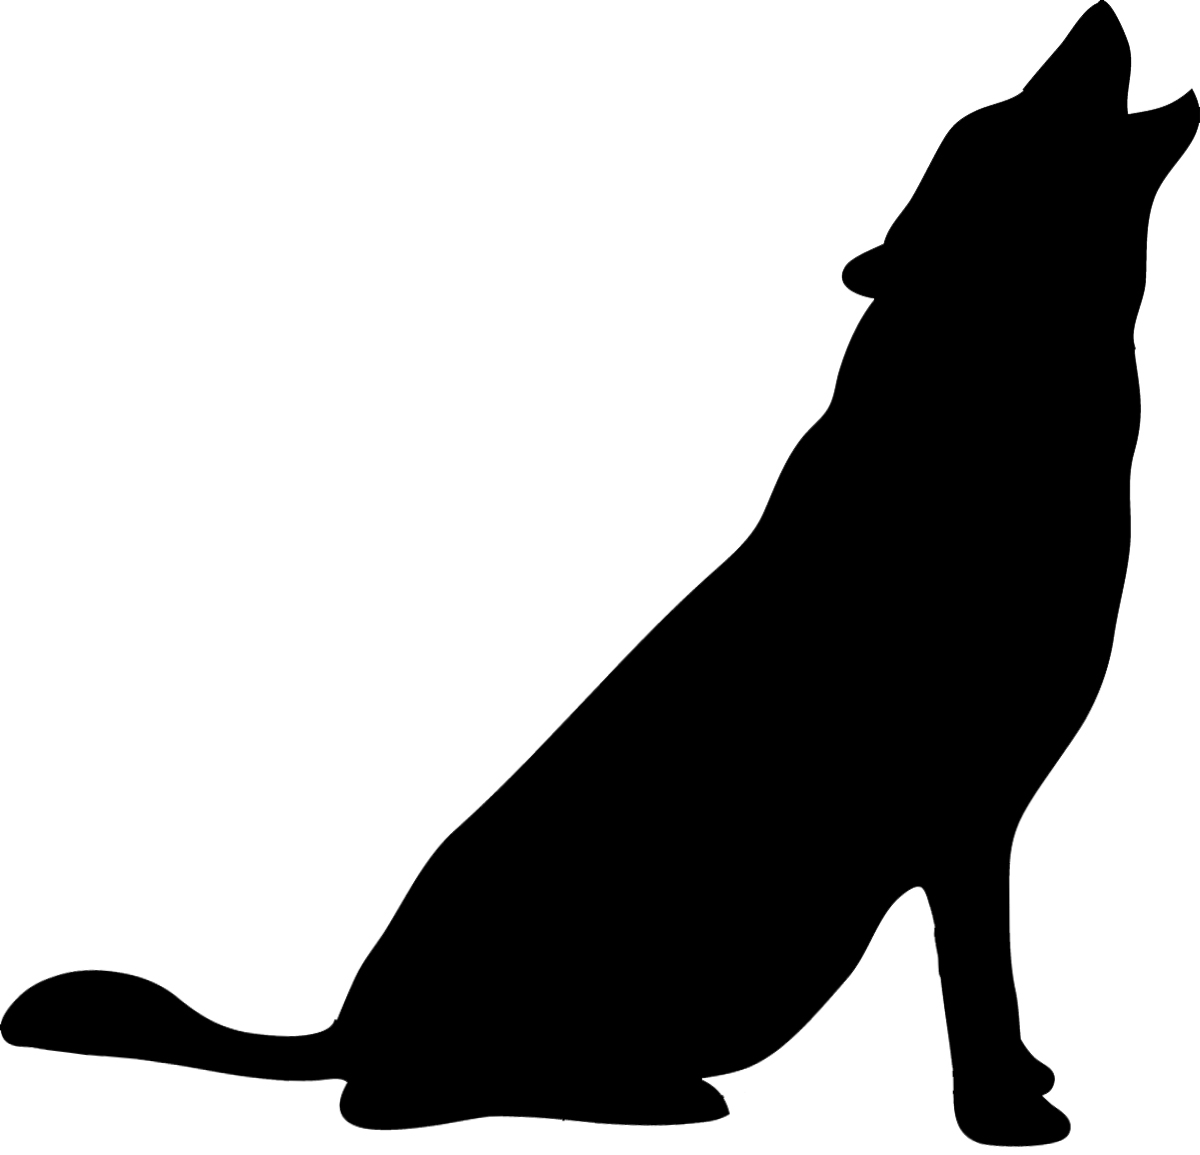 Howling wolf silhouette